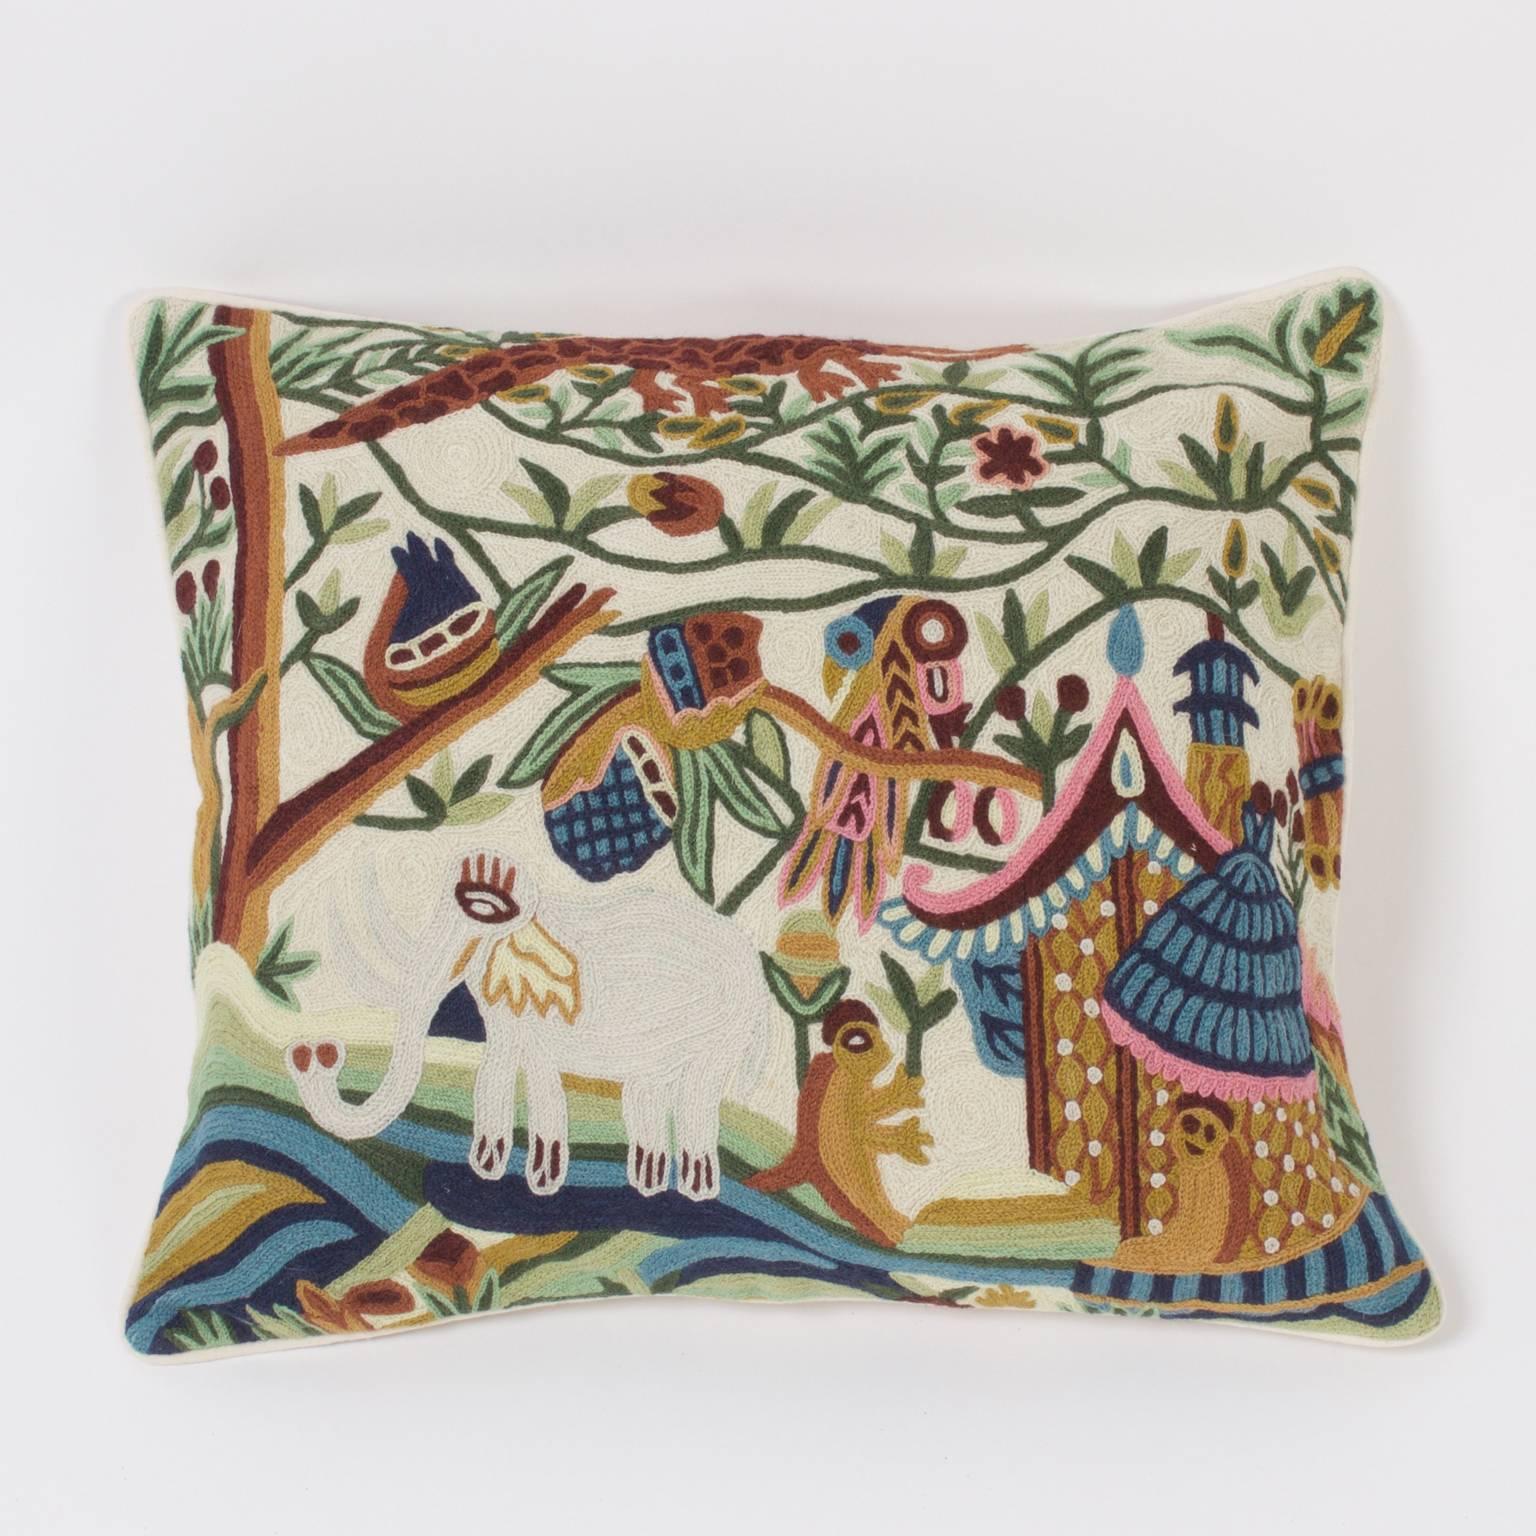 Pair of handcrafted crewel pillows with a whimsical point of view depicting an elephant, monkey, birds, lizard, flowers and trees all living harmoniously around a simple home.
  